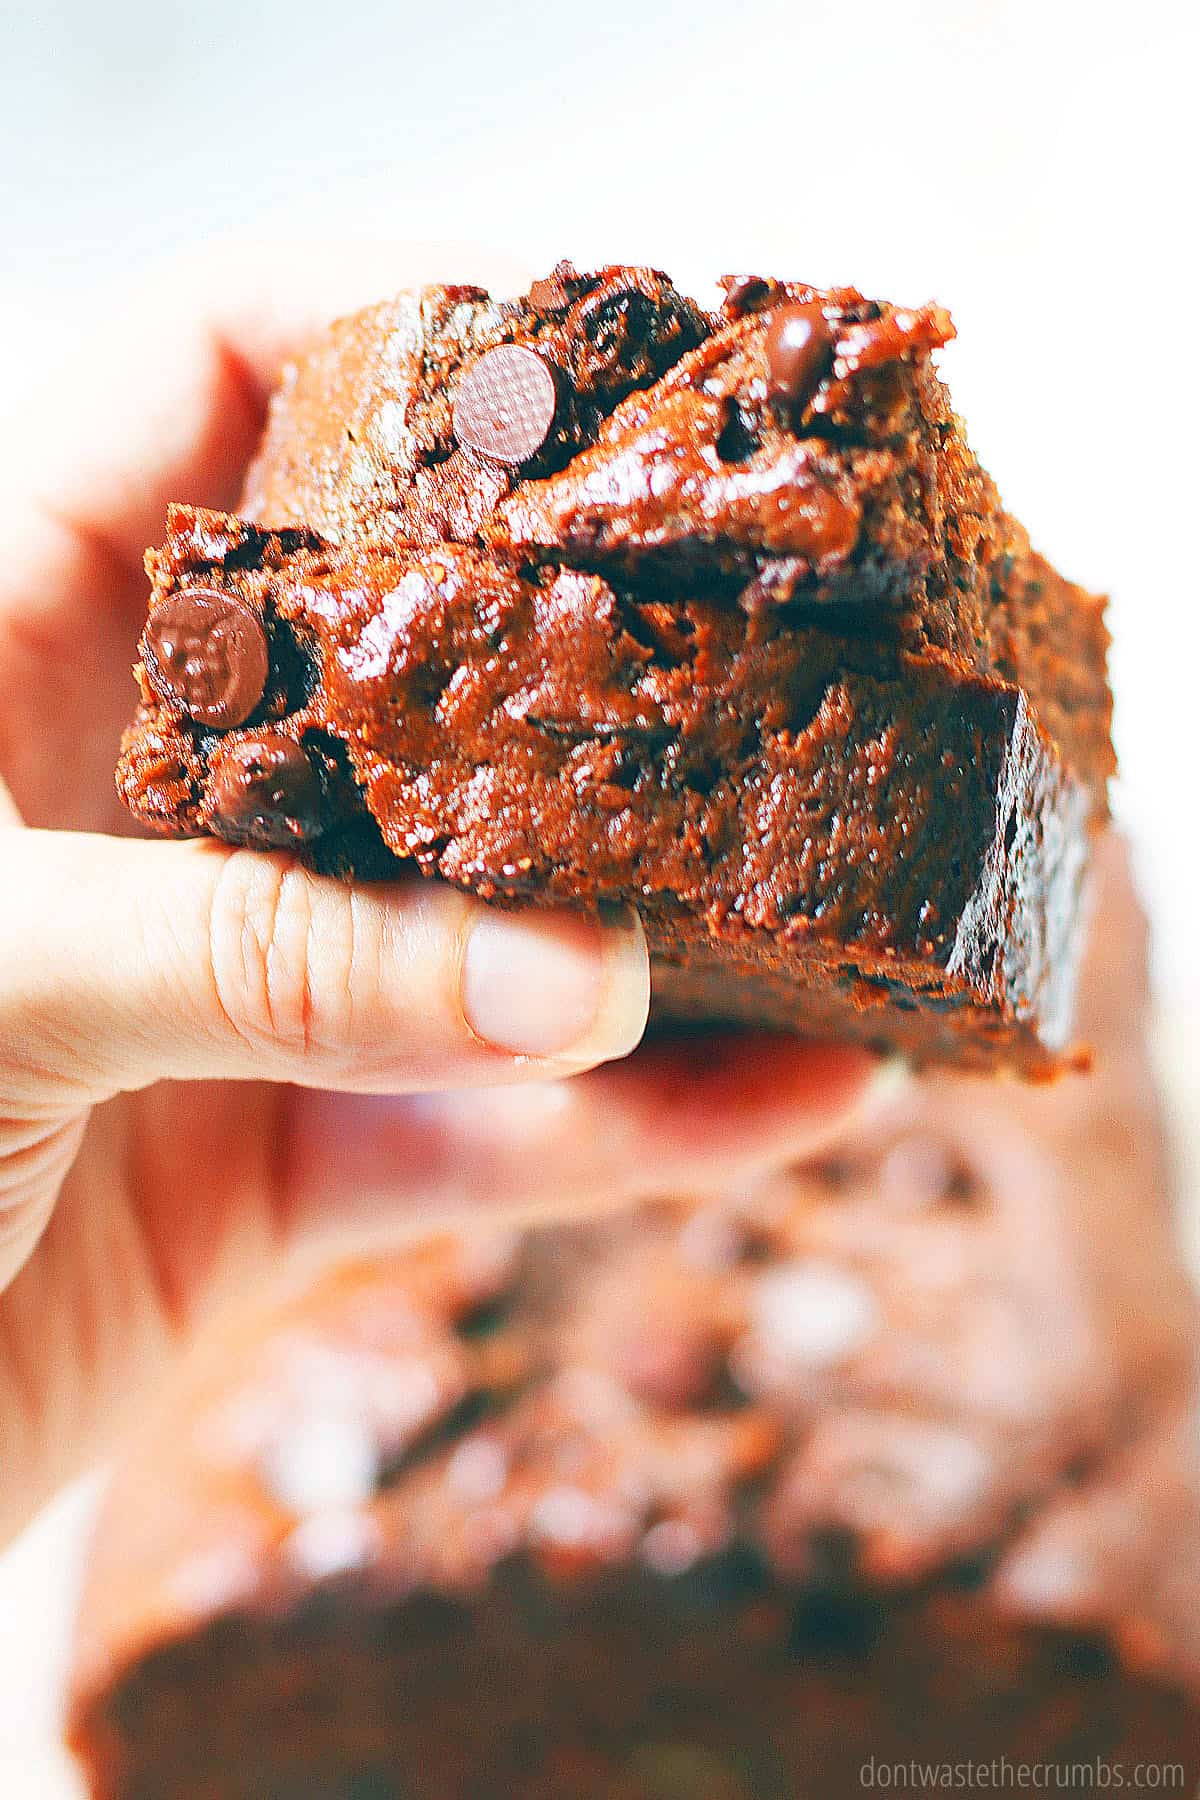 A hand holding a slice of chocolate zucchini bread.